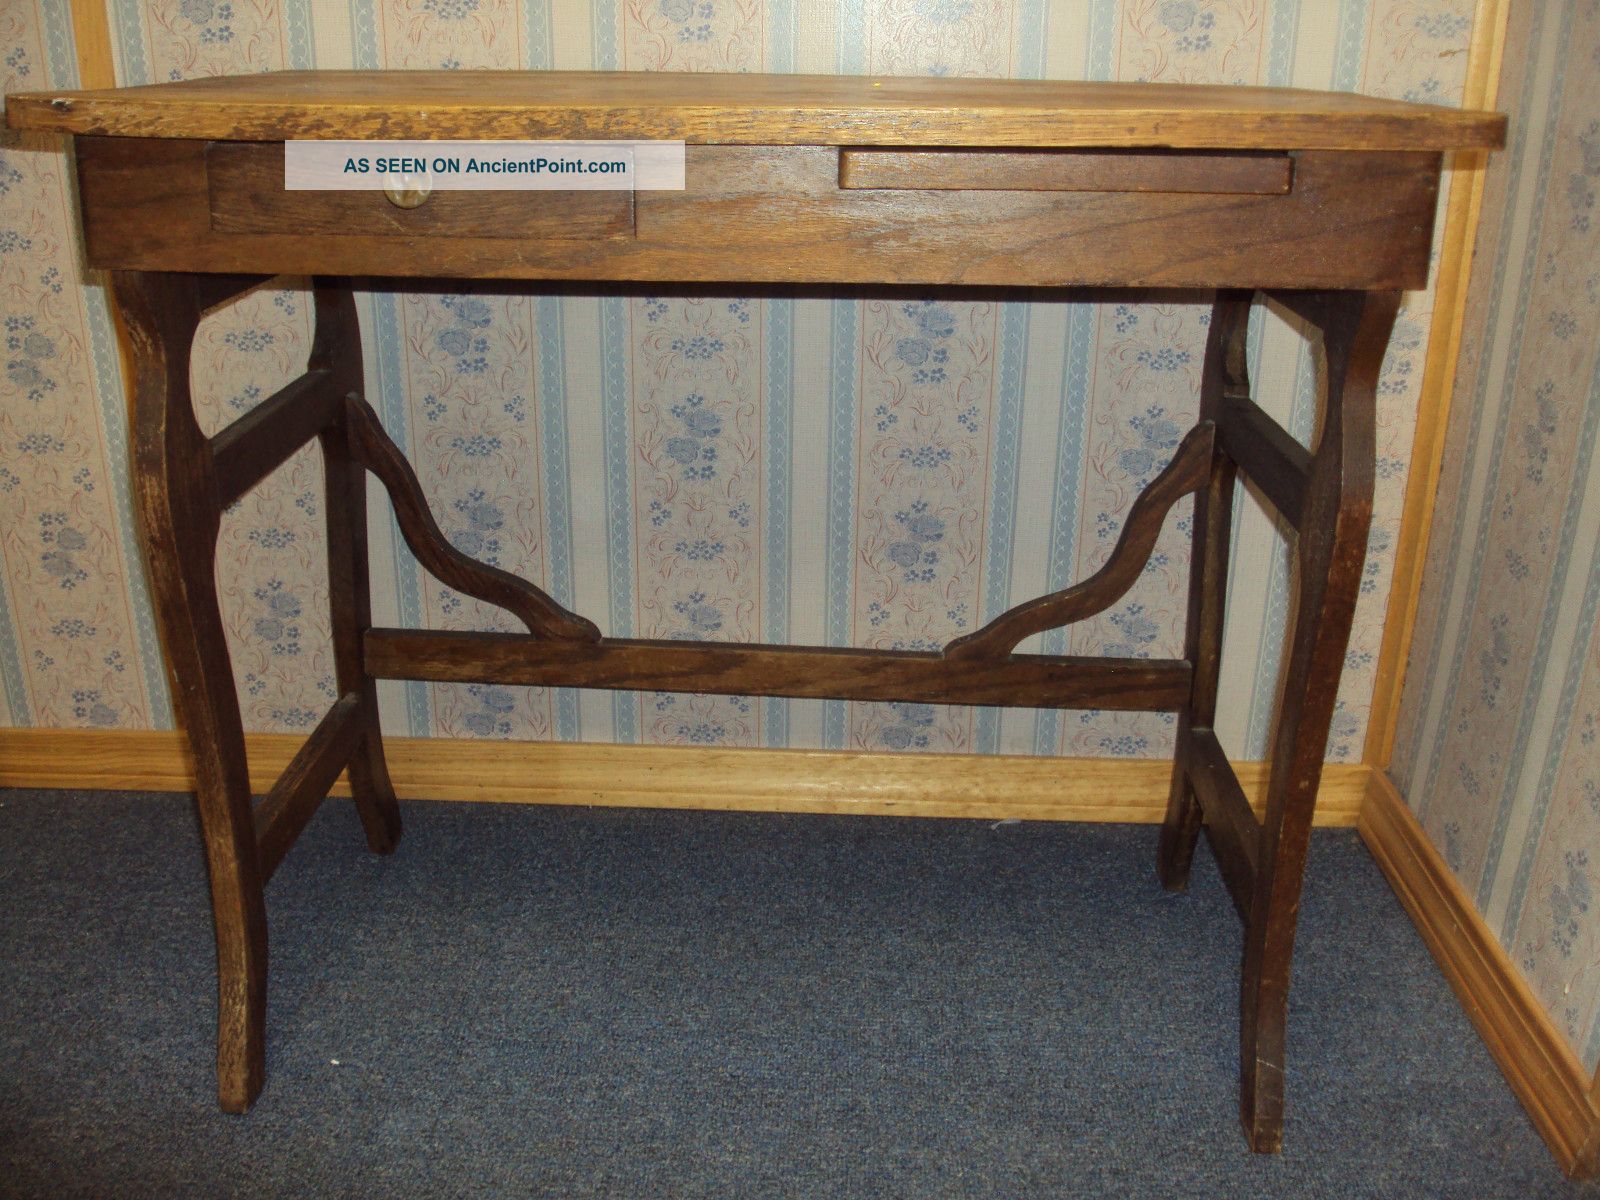 Solid Oak Writing Desk For Home Or Office Or Collection In Mint Condition 1800-1899 photo